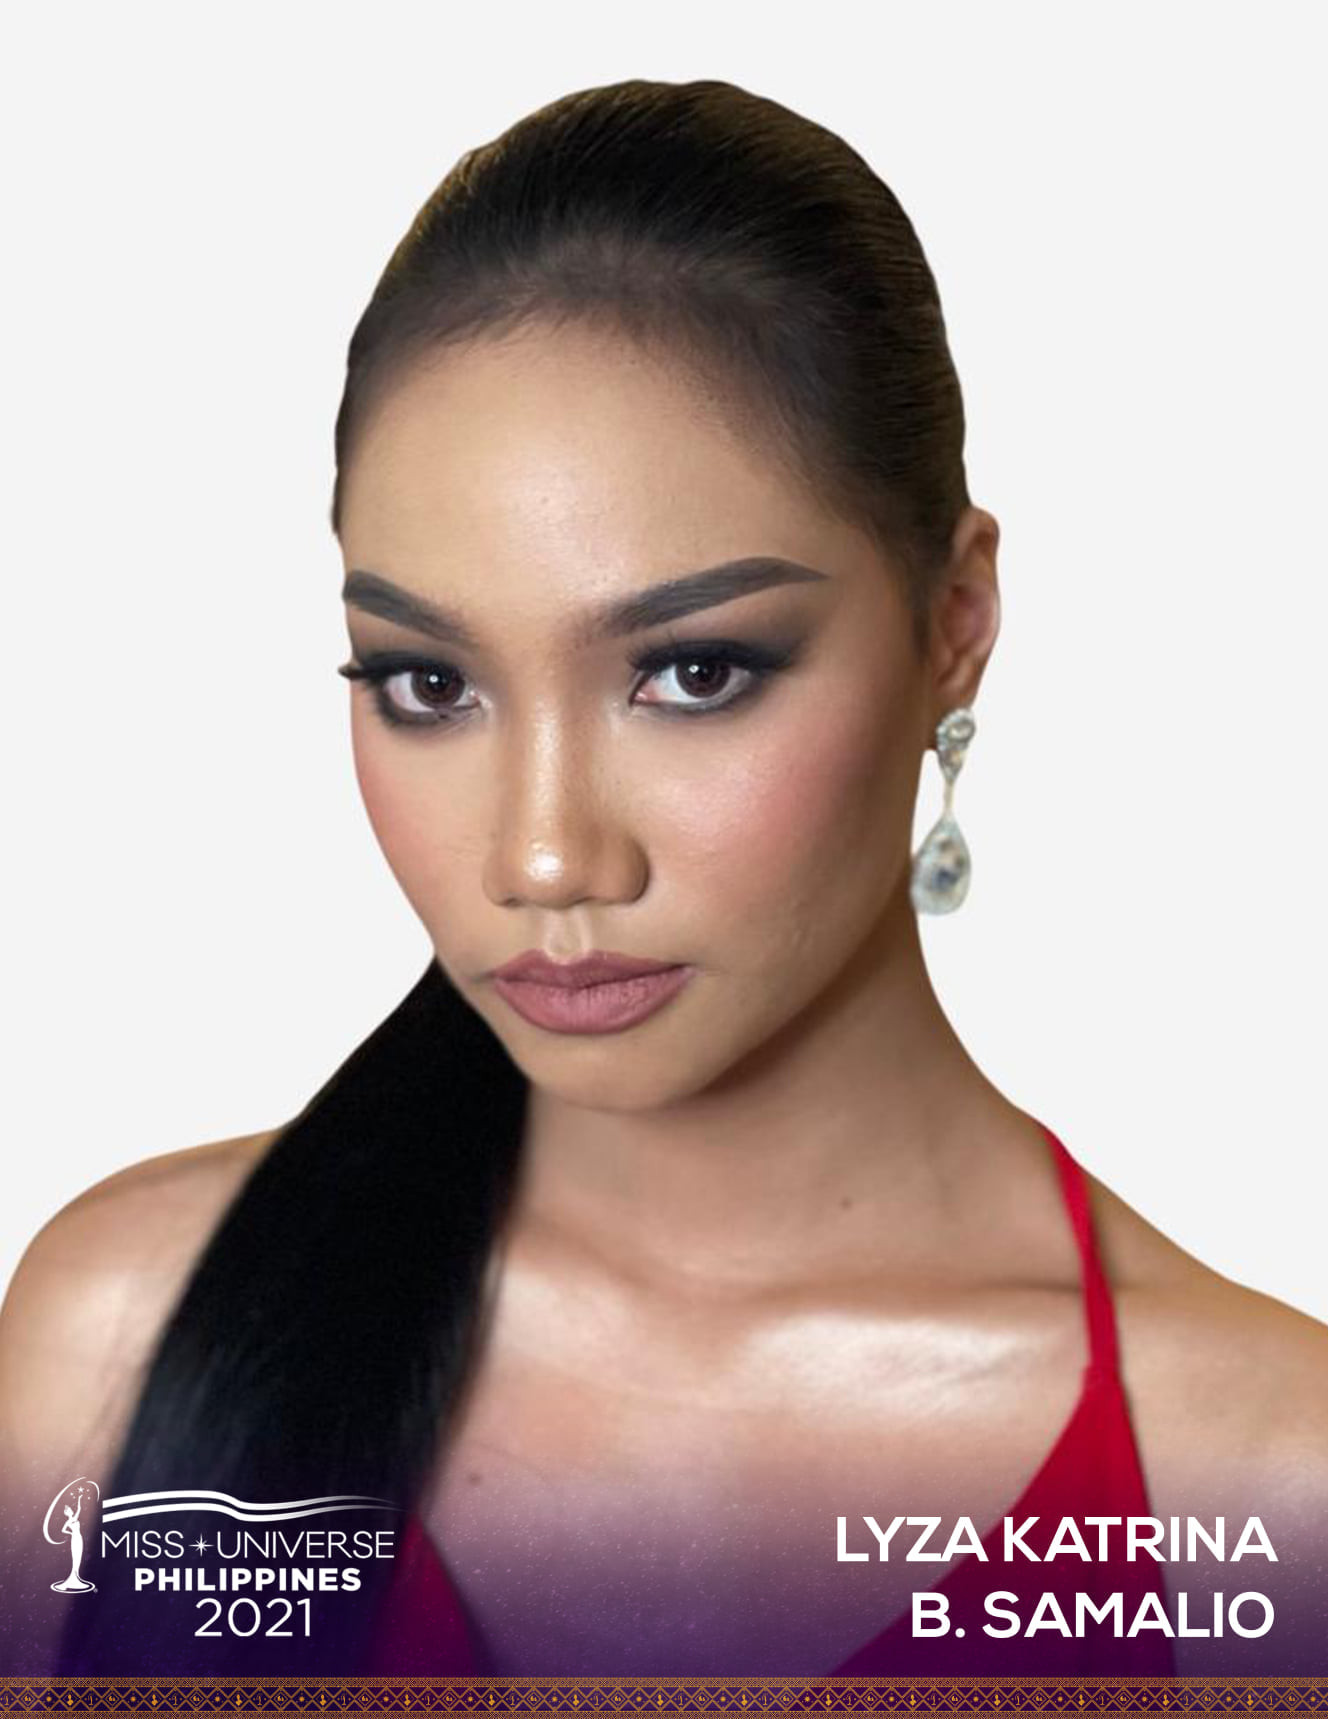 pre-candidatas a miss universe philippines 2021. AlFZHF